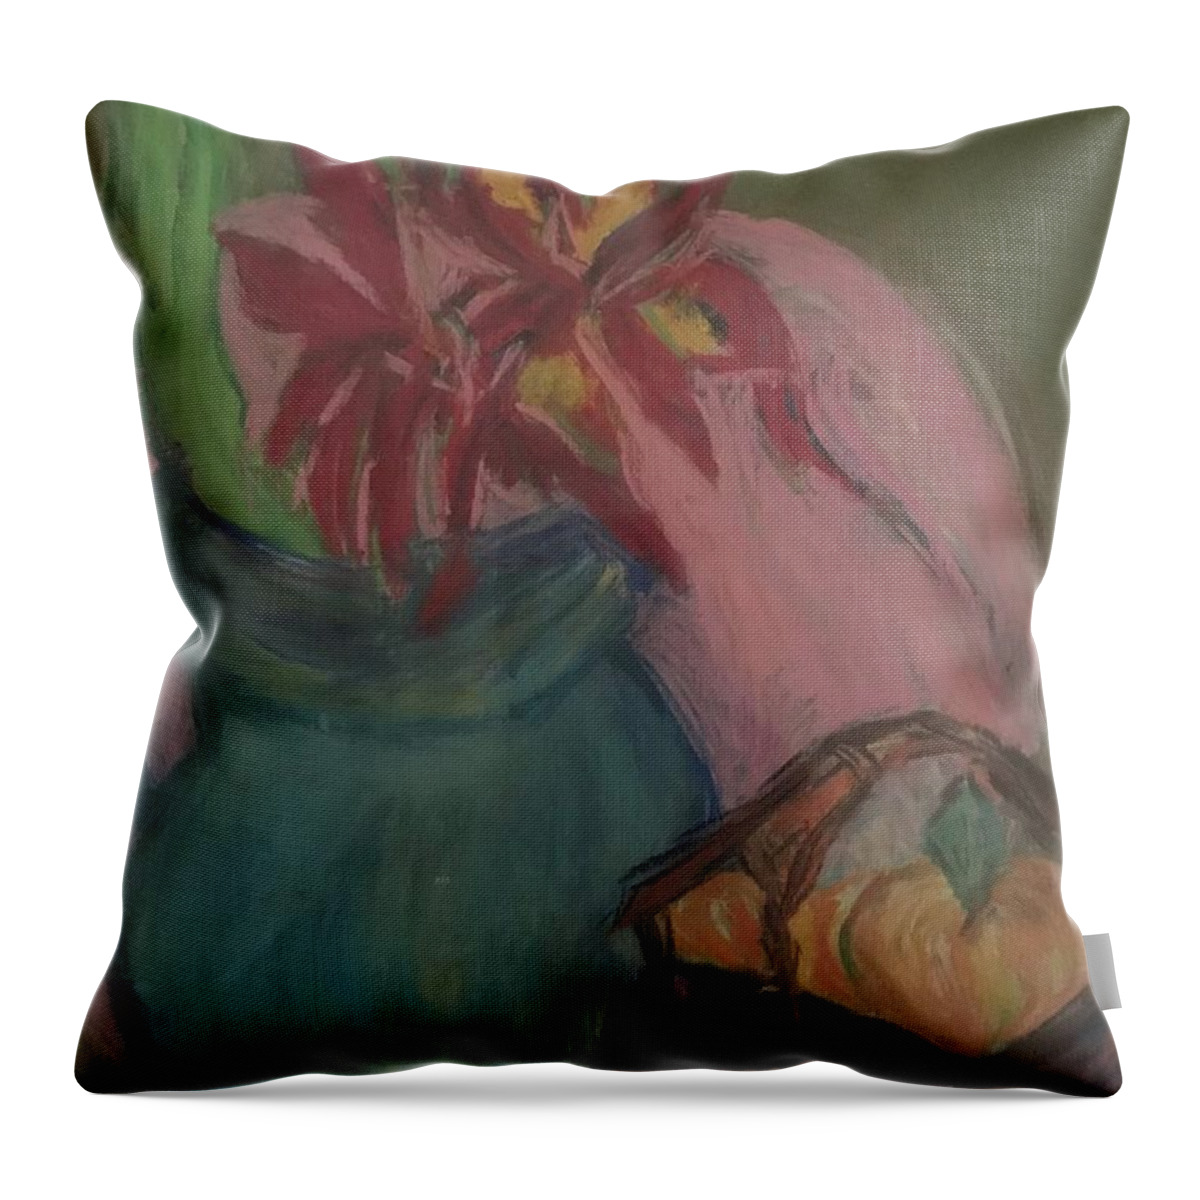 Fruits Throw Pillow featuring the painting Fruit Basket by Clare Ventura